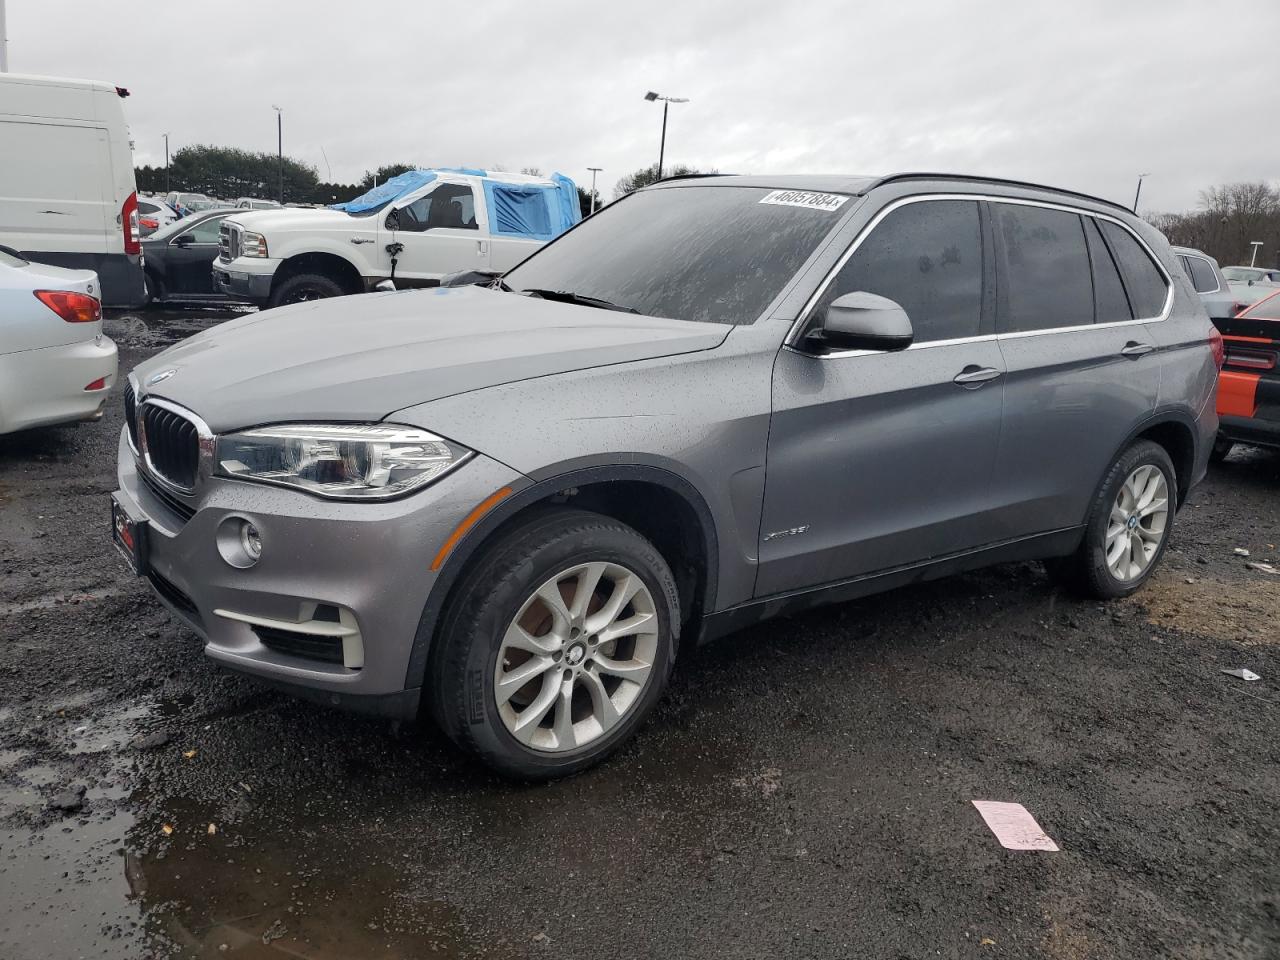 vin: 5UXKR0C53G0S91141 5UXKR0C53G0S91141 2016 bmw x5 3000 for Sale in 06026 9765, Ct - Hartford Springfield, East Granby, USA